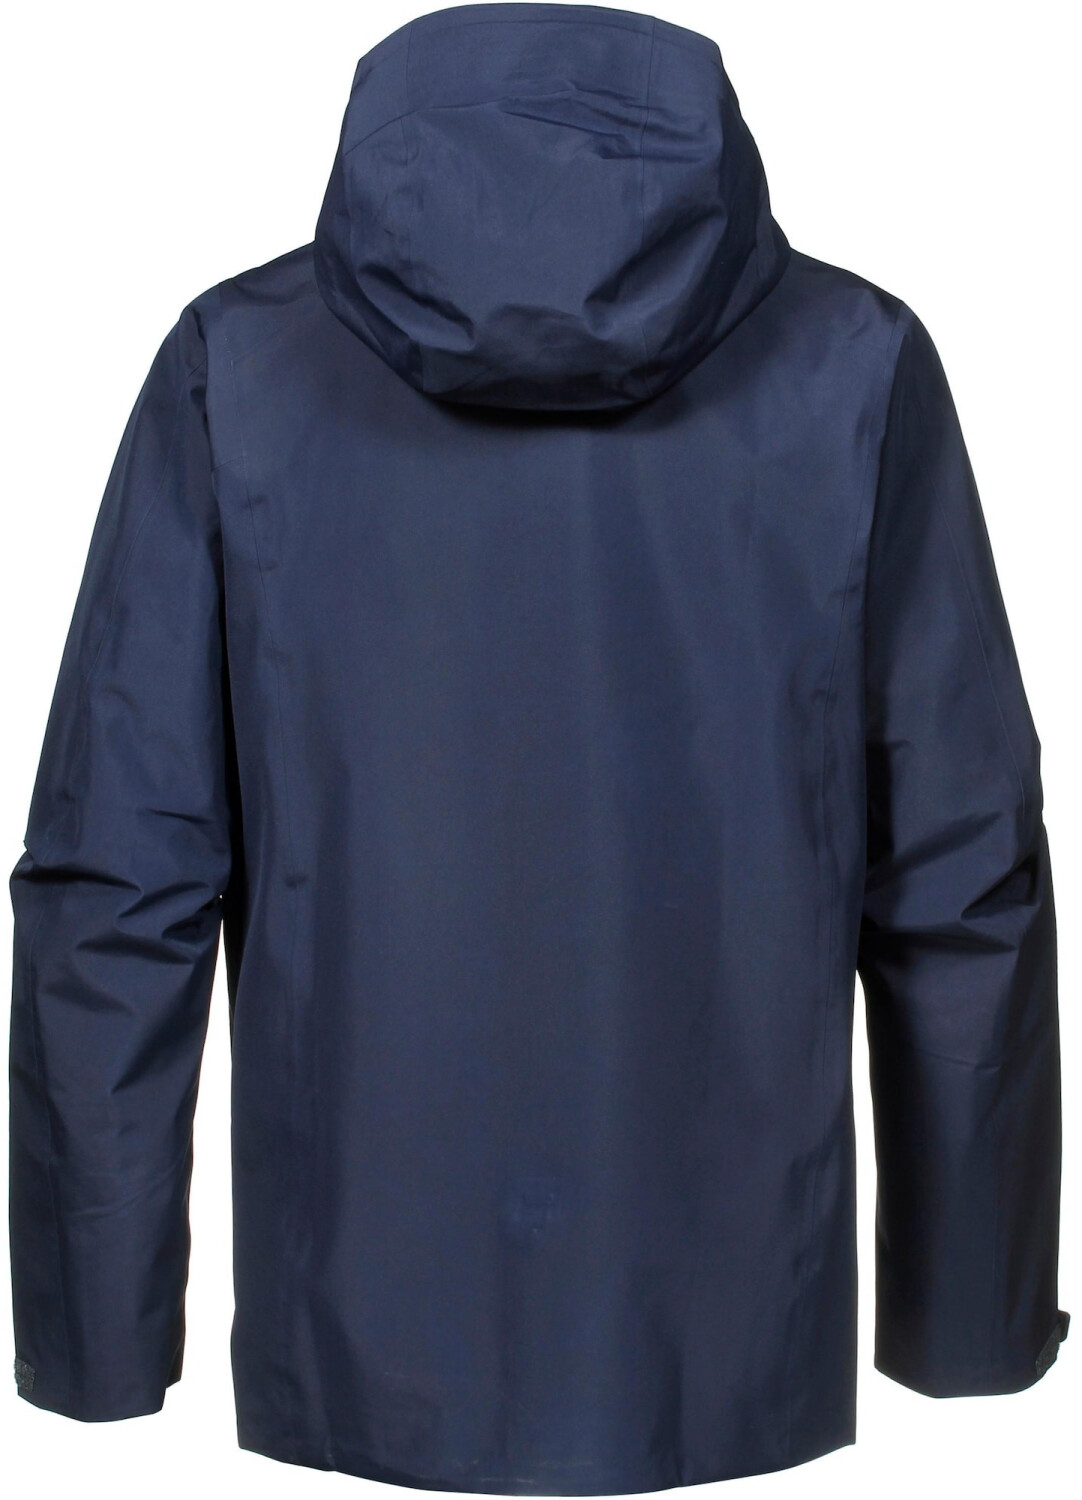 Buy Patagonia Men's Triolet Jacket CLASSIC NAVY from Â£300.00 (Today) â Best Deals on idealo.co.uk